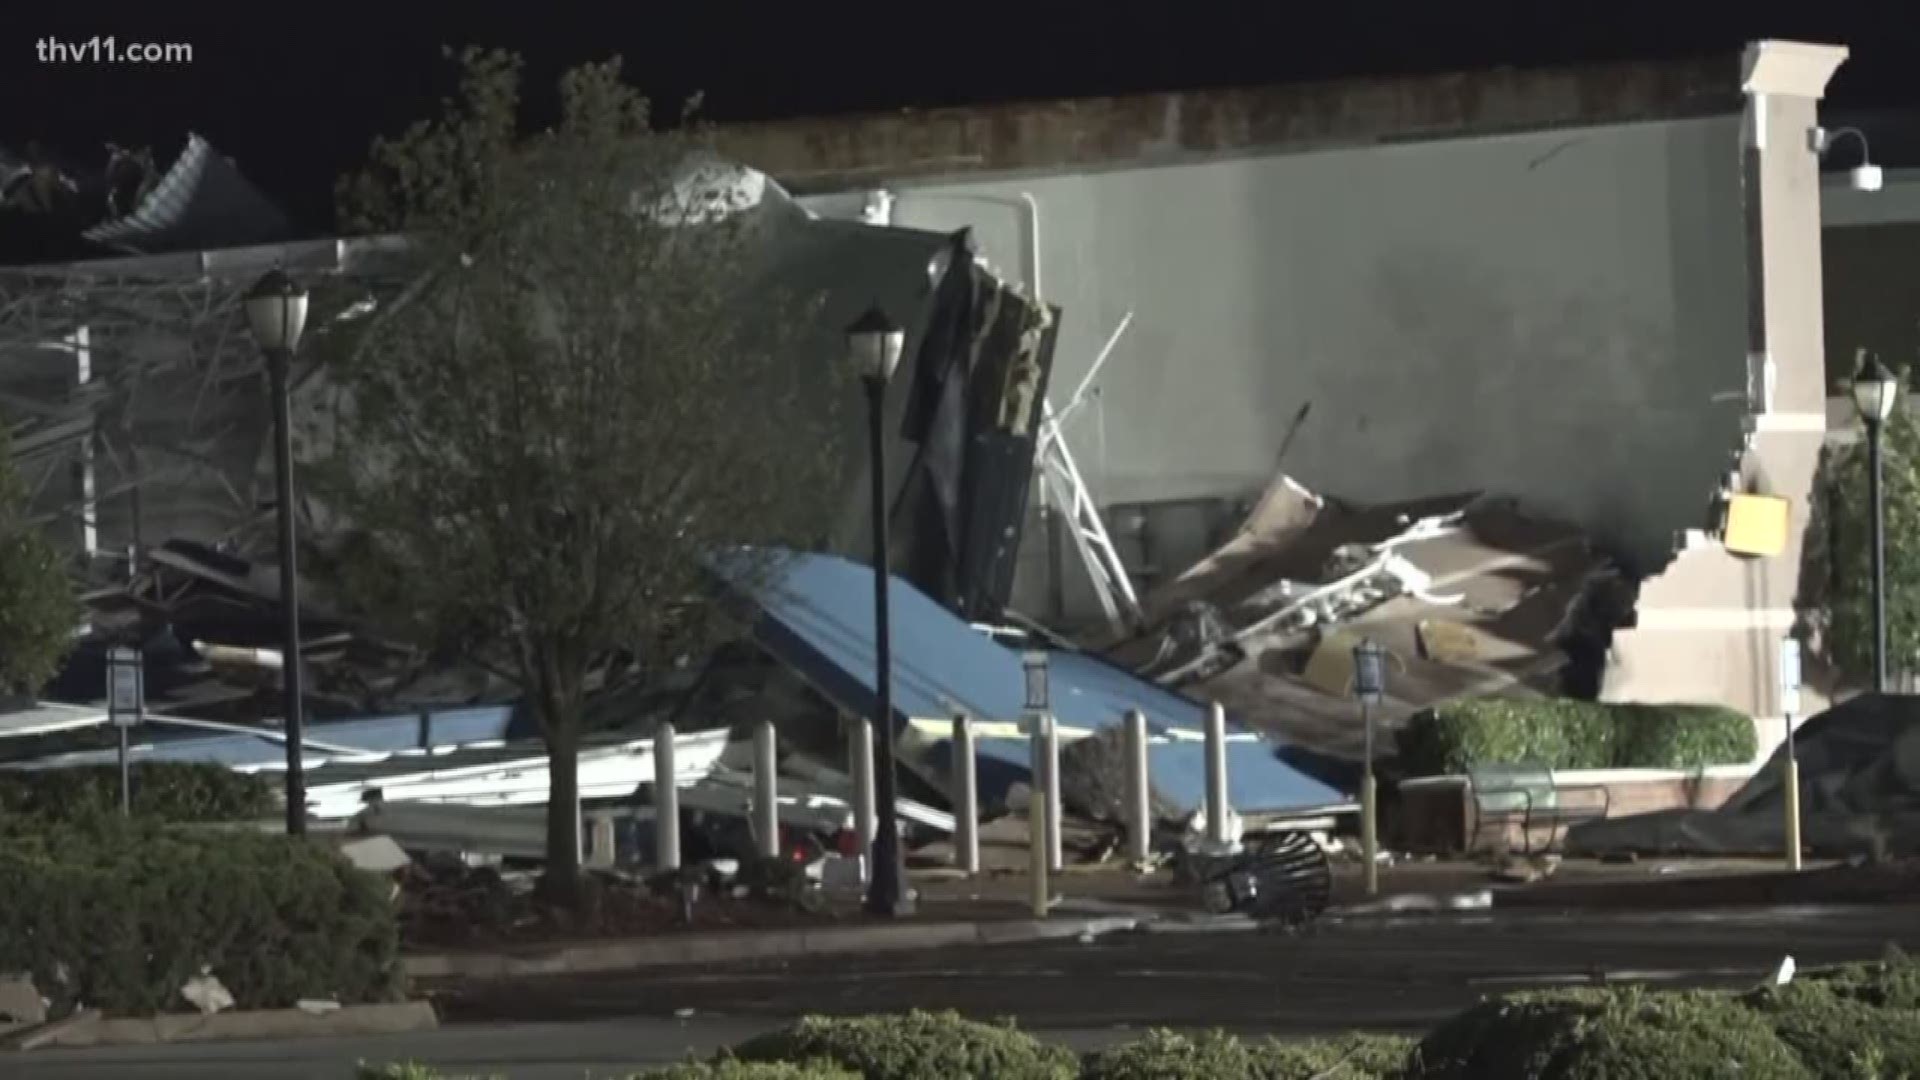 A violent tornado ripped through the middle of Jonesboro around 5 p.m. on Saturday evening. Authorities are going door-to-door trying to make sure everyone's okay.